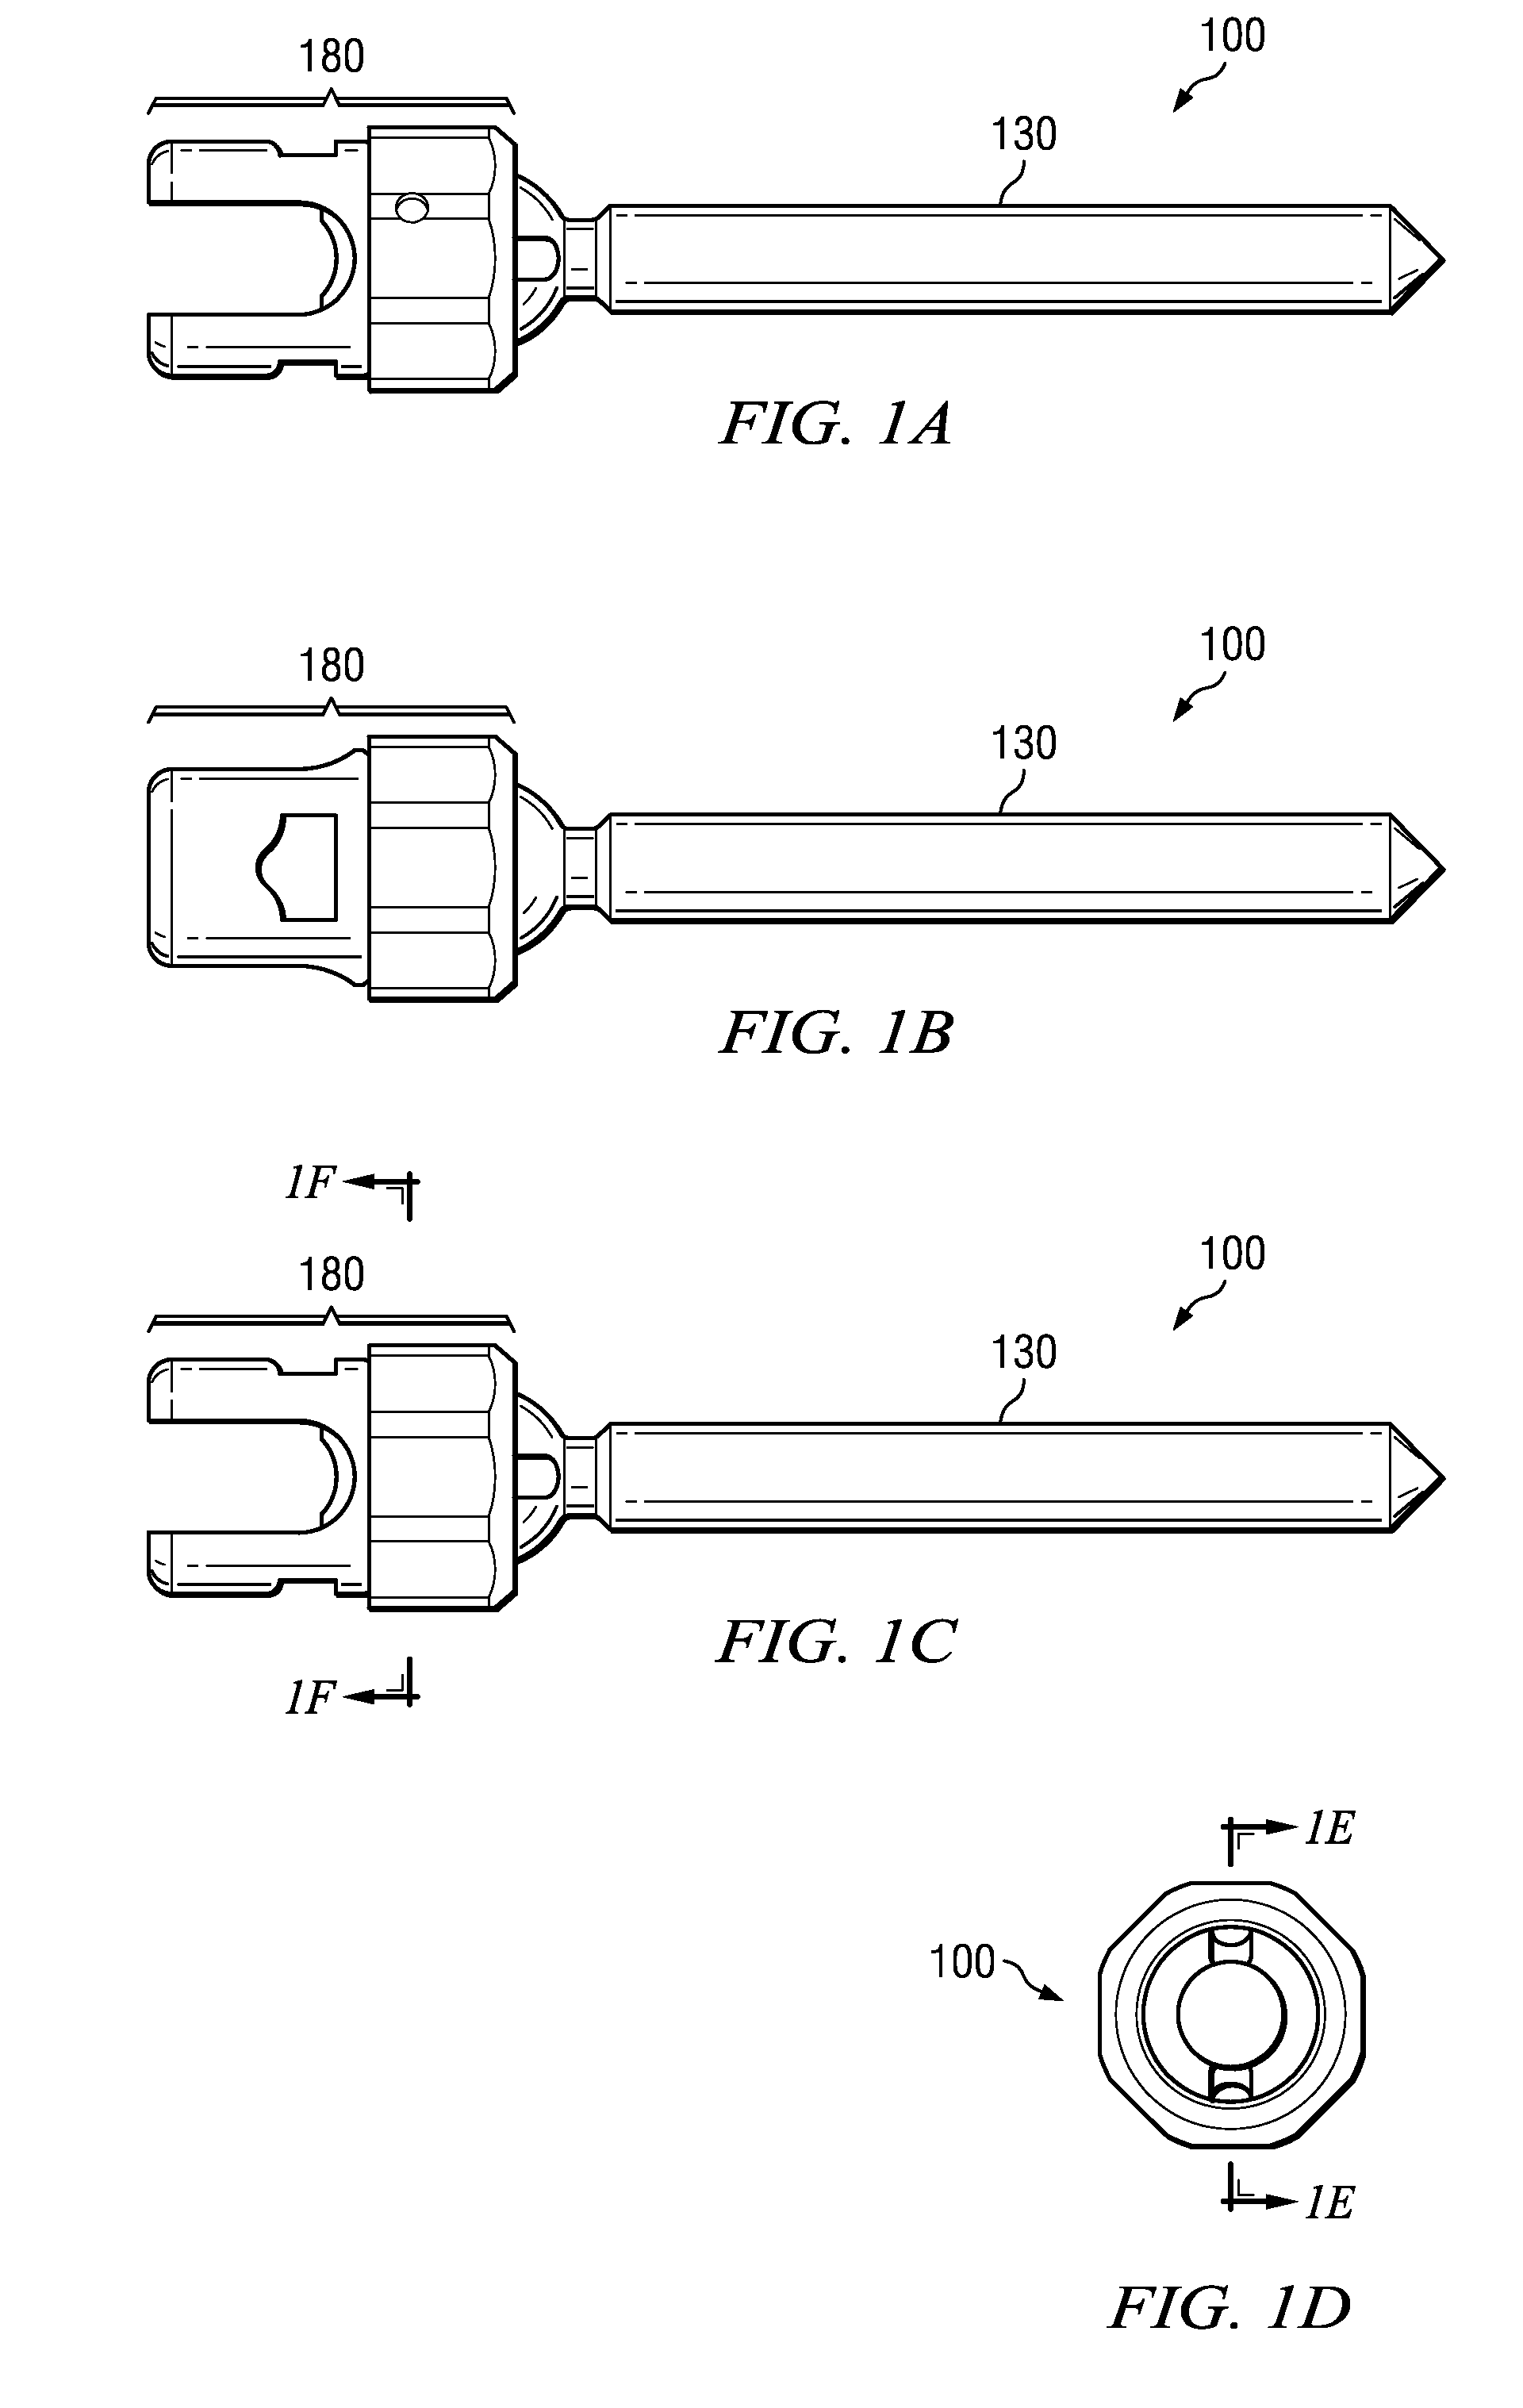 Multi-axial pedicle fixation assembly and method for use